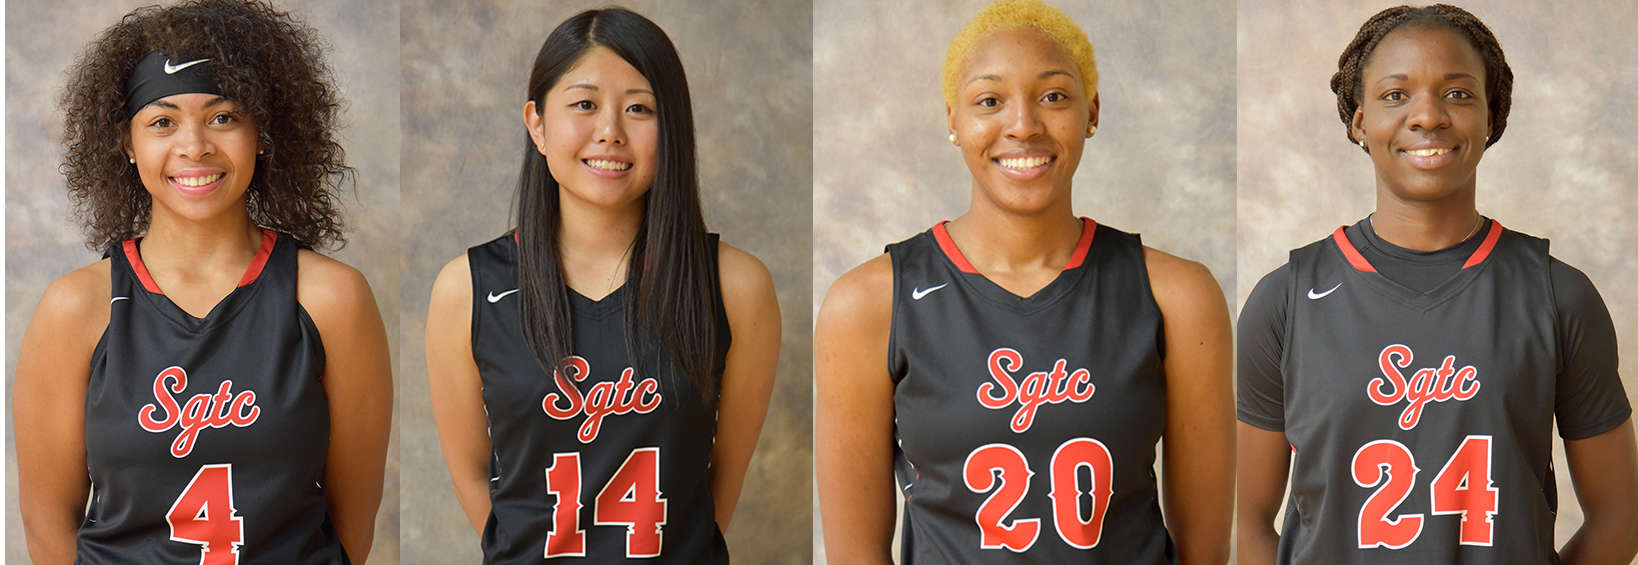 Four South Georgia Technical College Lady Jets are currently ranked nationally in their respective areas. Shown above (l to r) are: Camille Coleman (4), Kanna Suzuki (14), Desiree Corbin (20), and Esther Adenike (24).